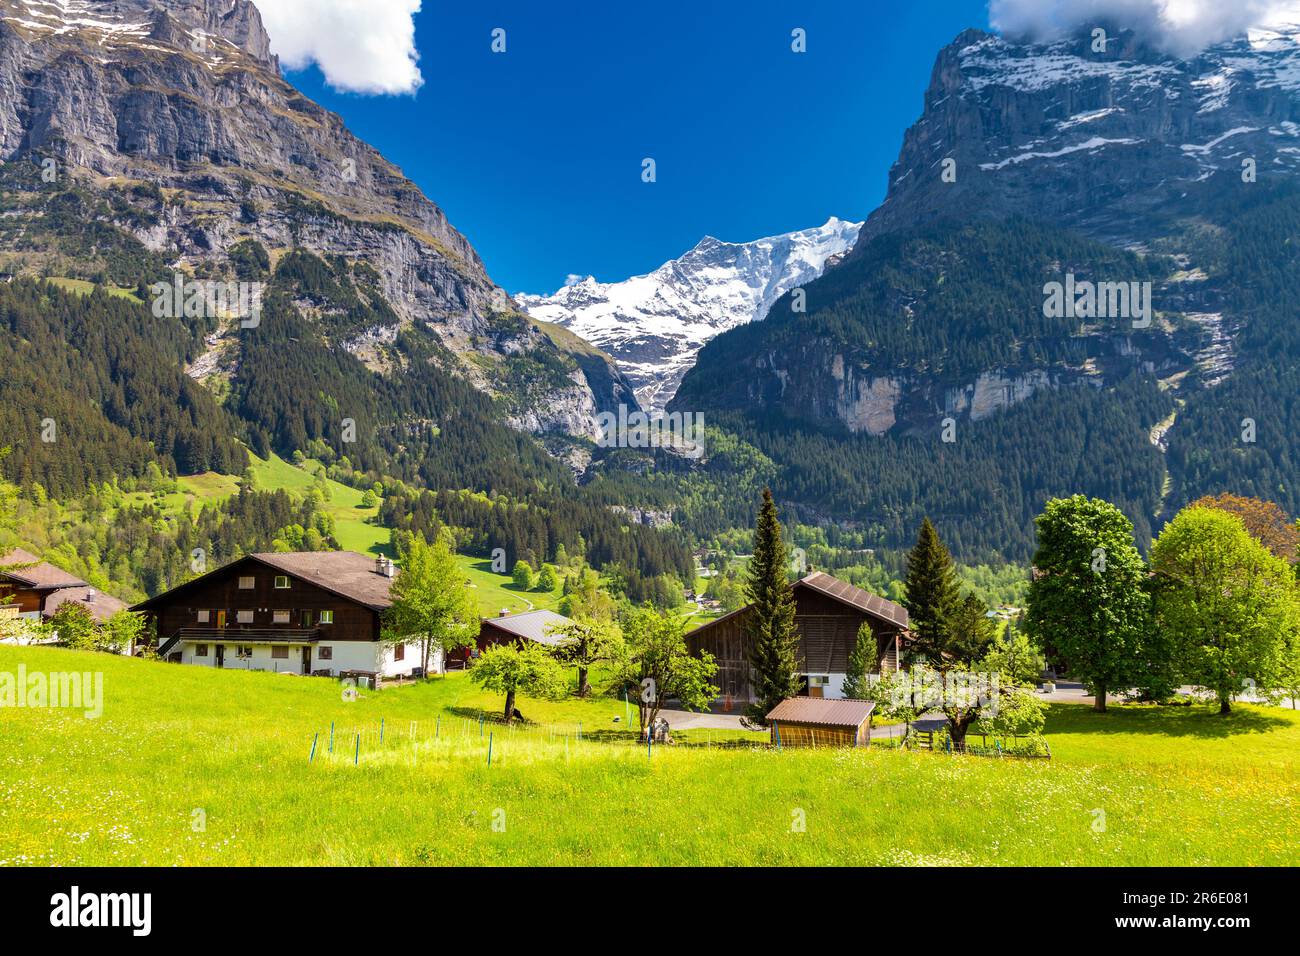 Views of Swiss chalets and the Alps, Grindelwald, Switzerland Stock Photo